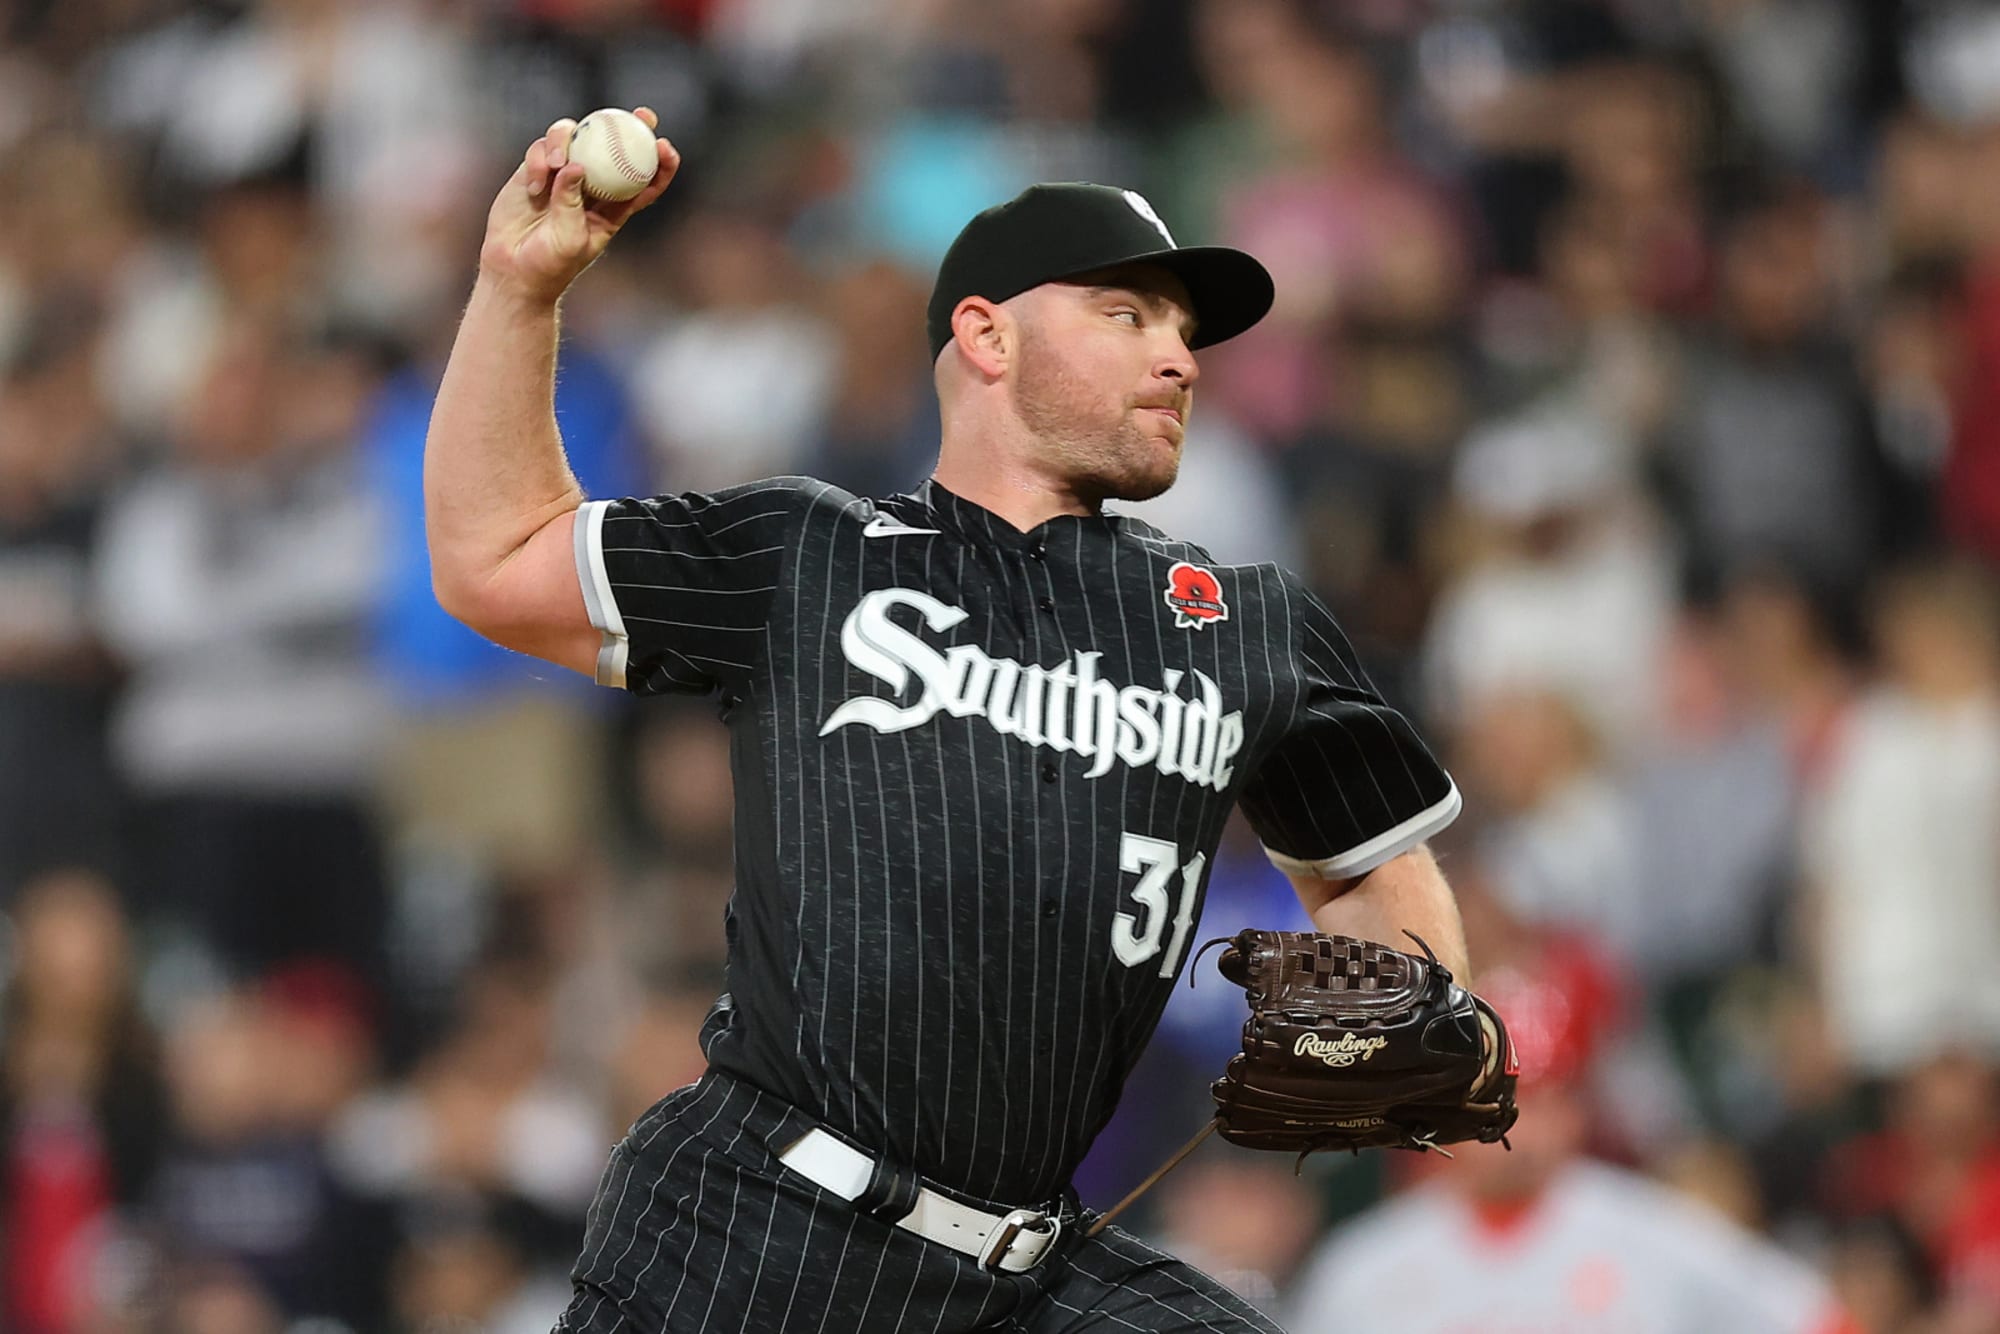 The Chicago White Sox have a wonderful human in Liam Hendriks